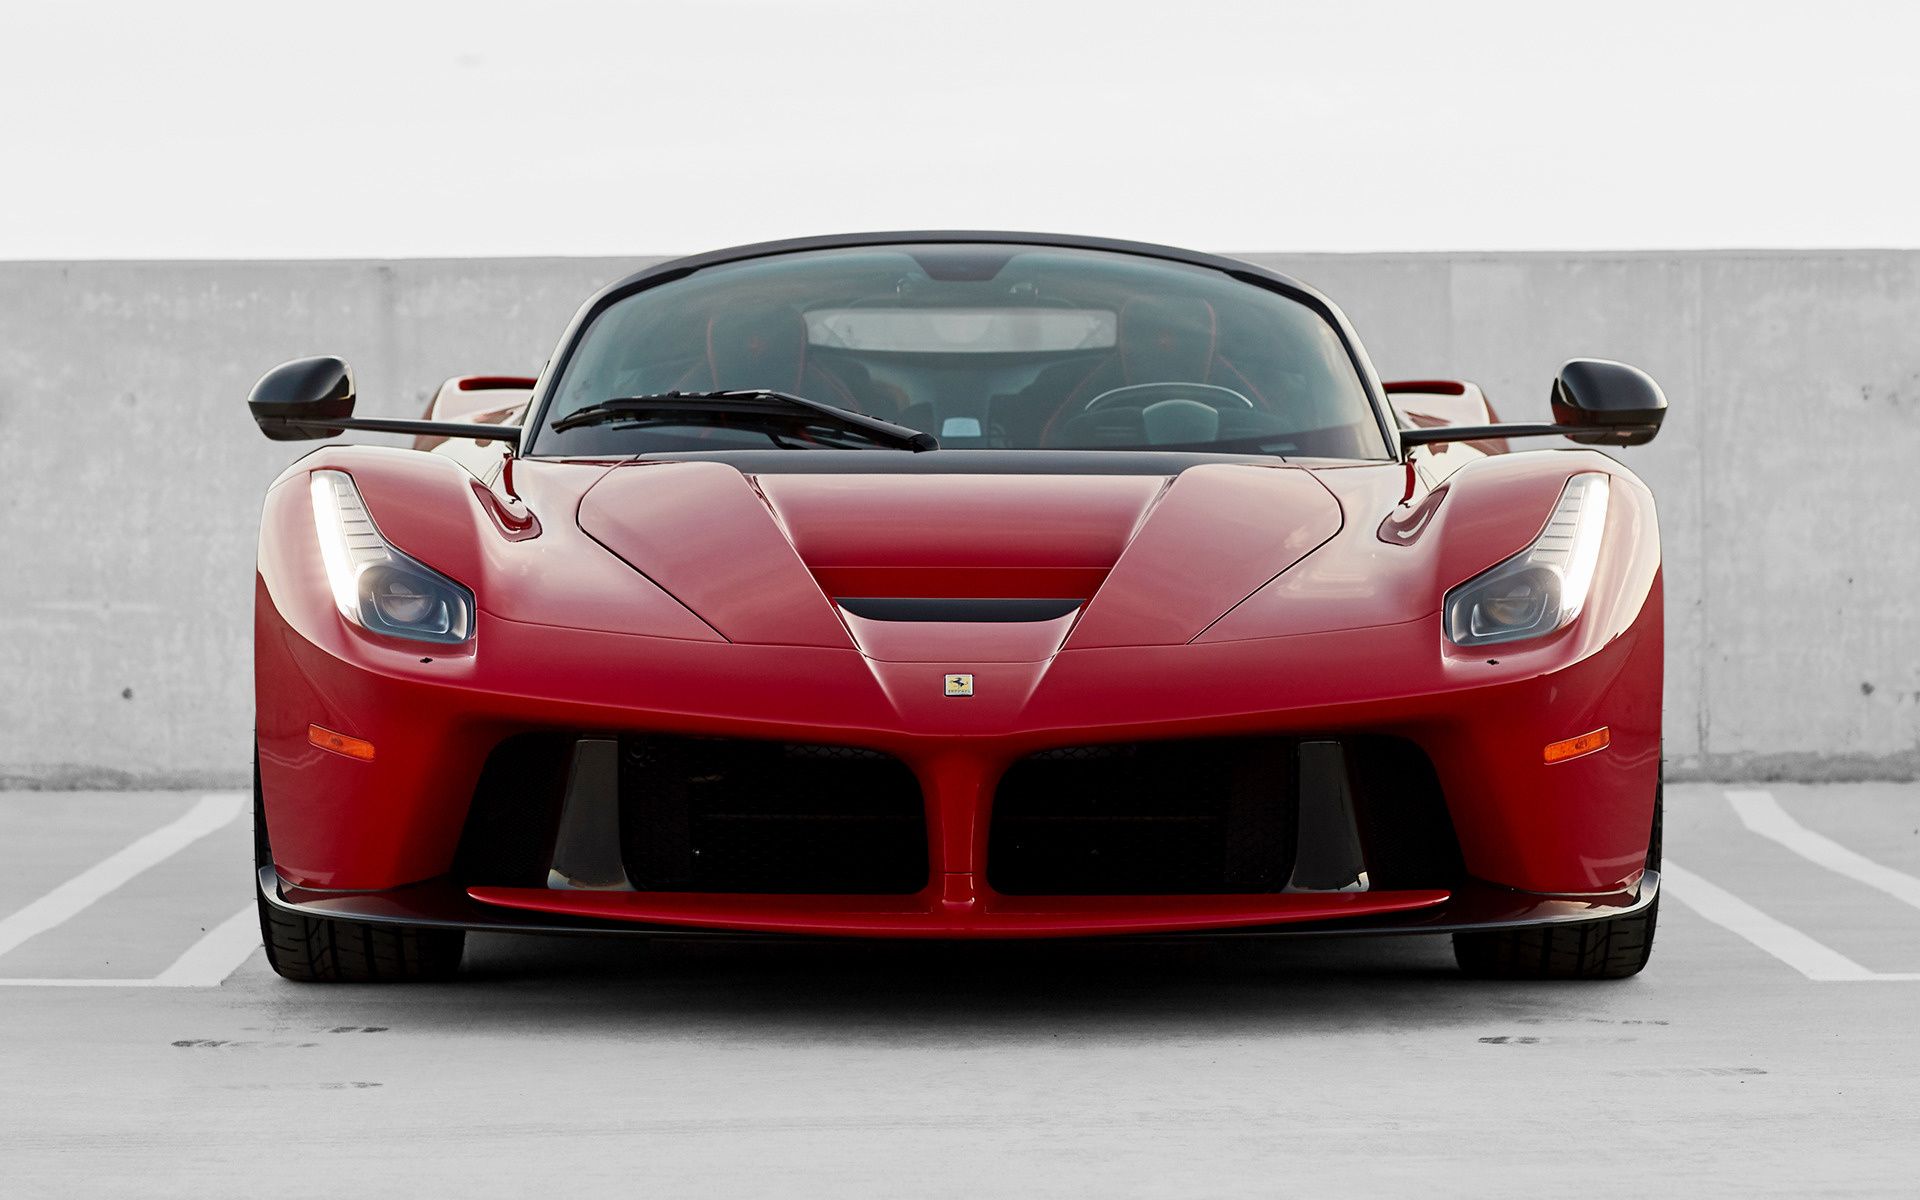 The front view on the 2016 LaFerrari Aperta.